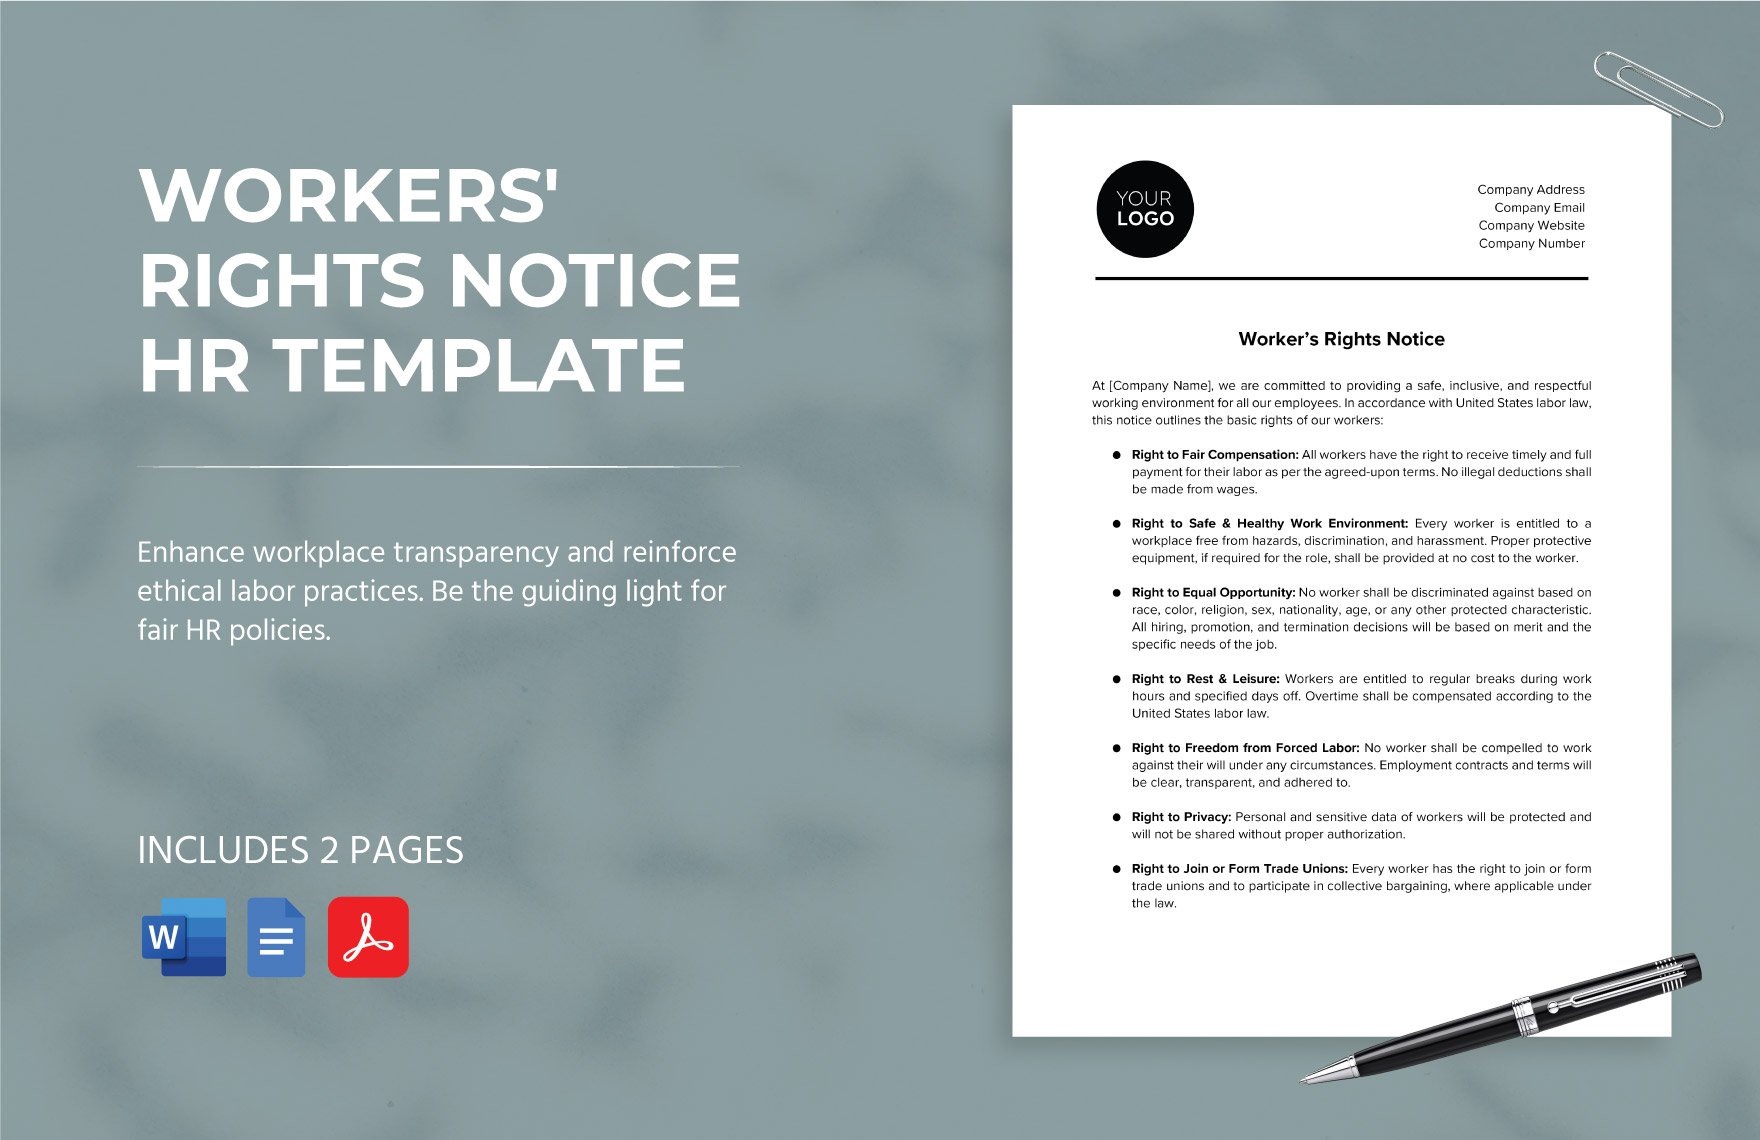 Workers' Rights Notice HR Template in Word, Google Docs, PDF